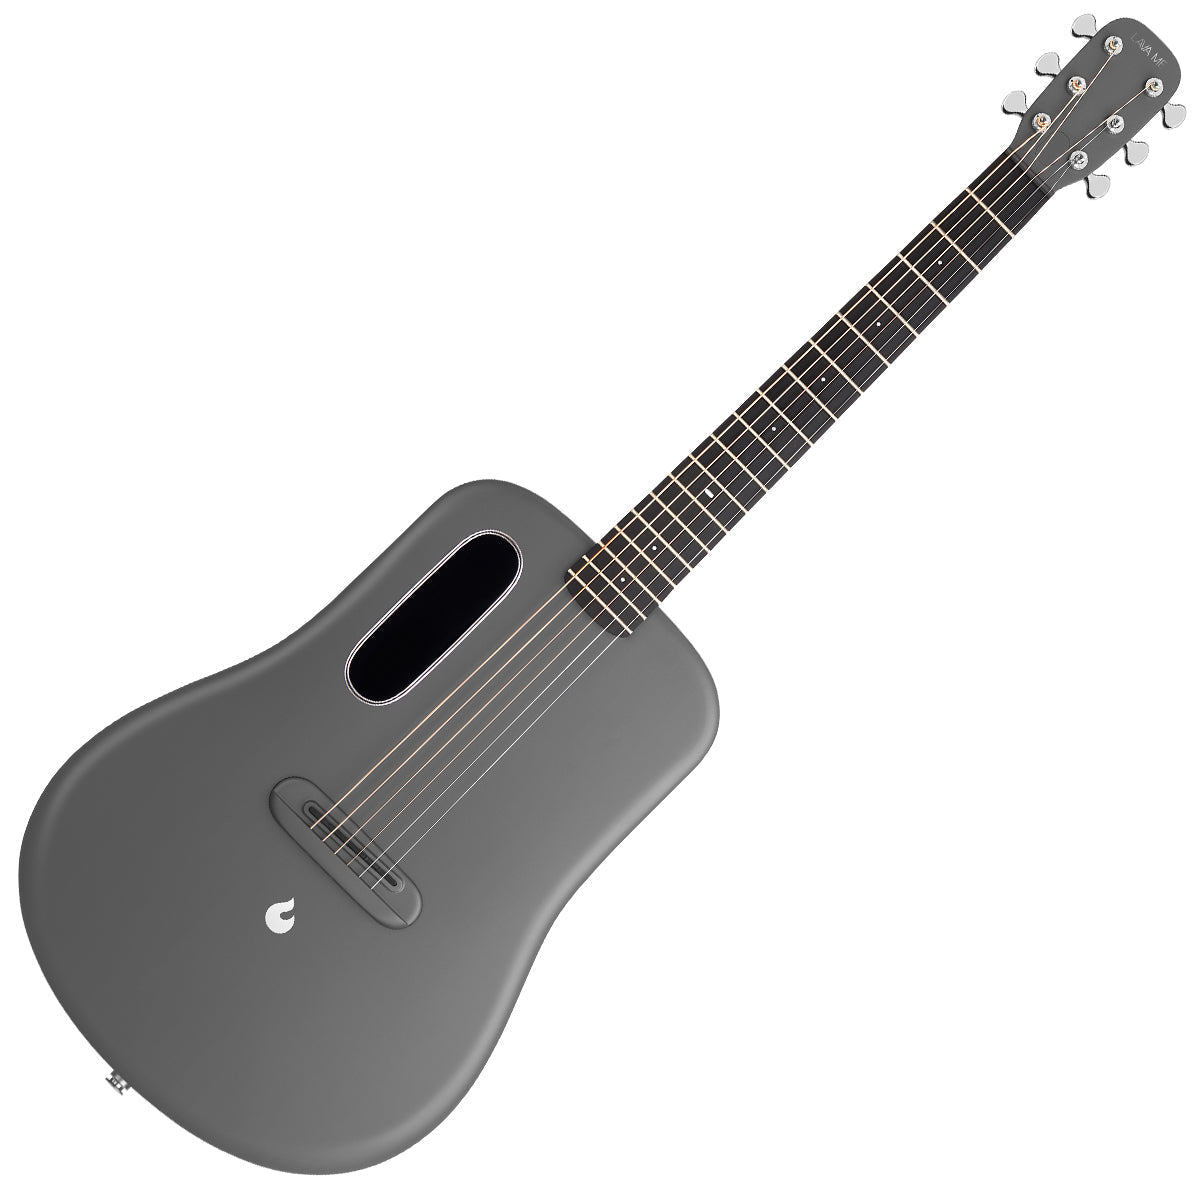 LAVA ME4 Carbon 36" with AirFlow Bag ~ Space Grey, Acoustic Guitar for sale at Richards Guitars.